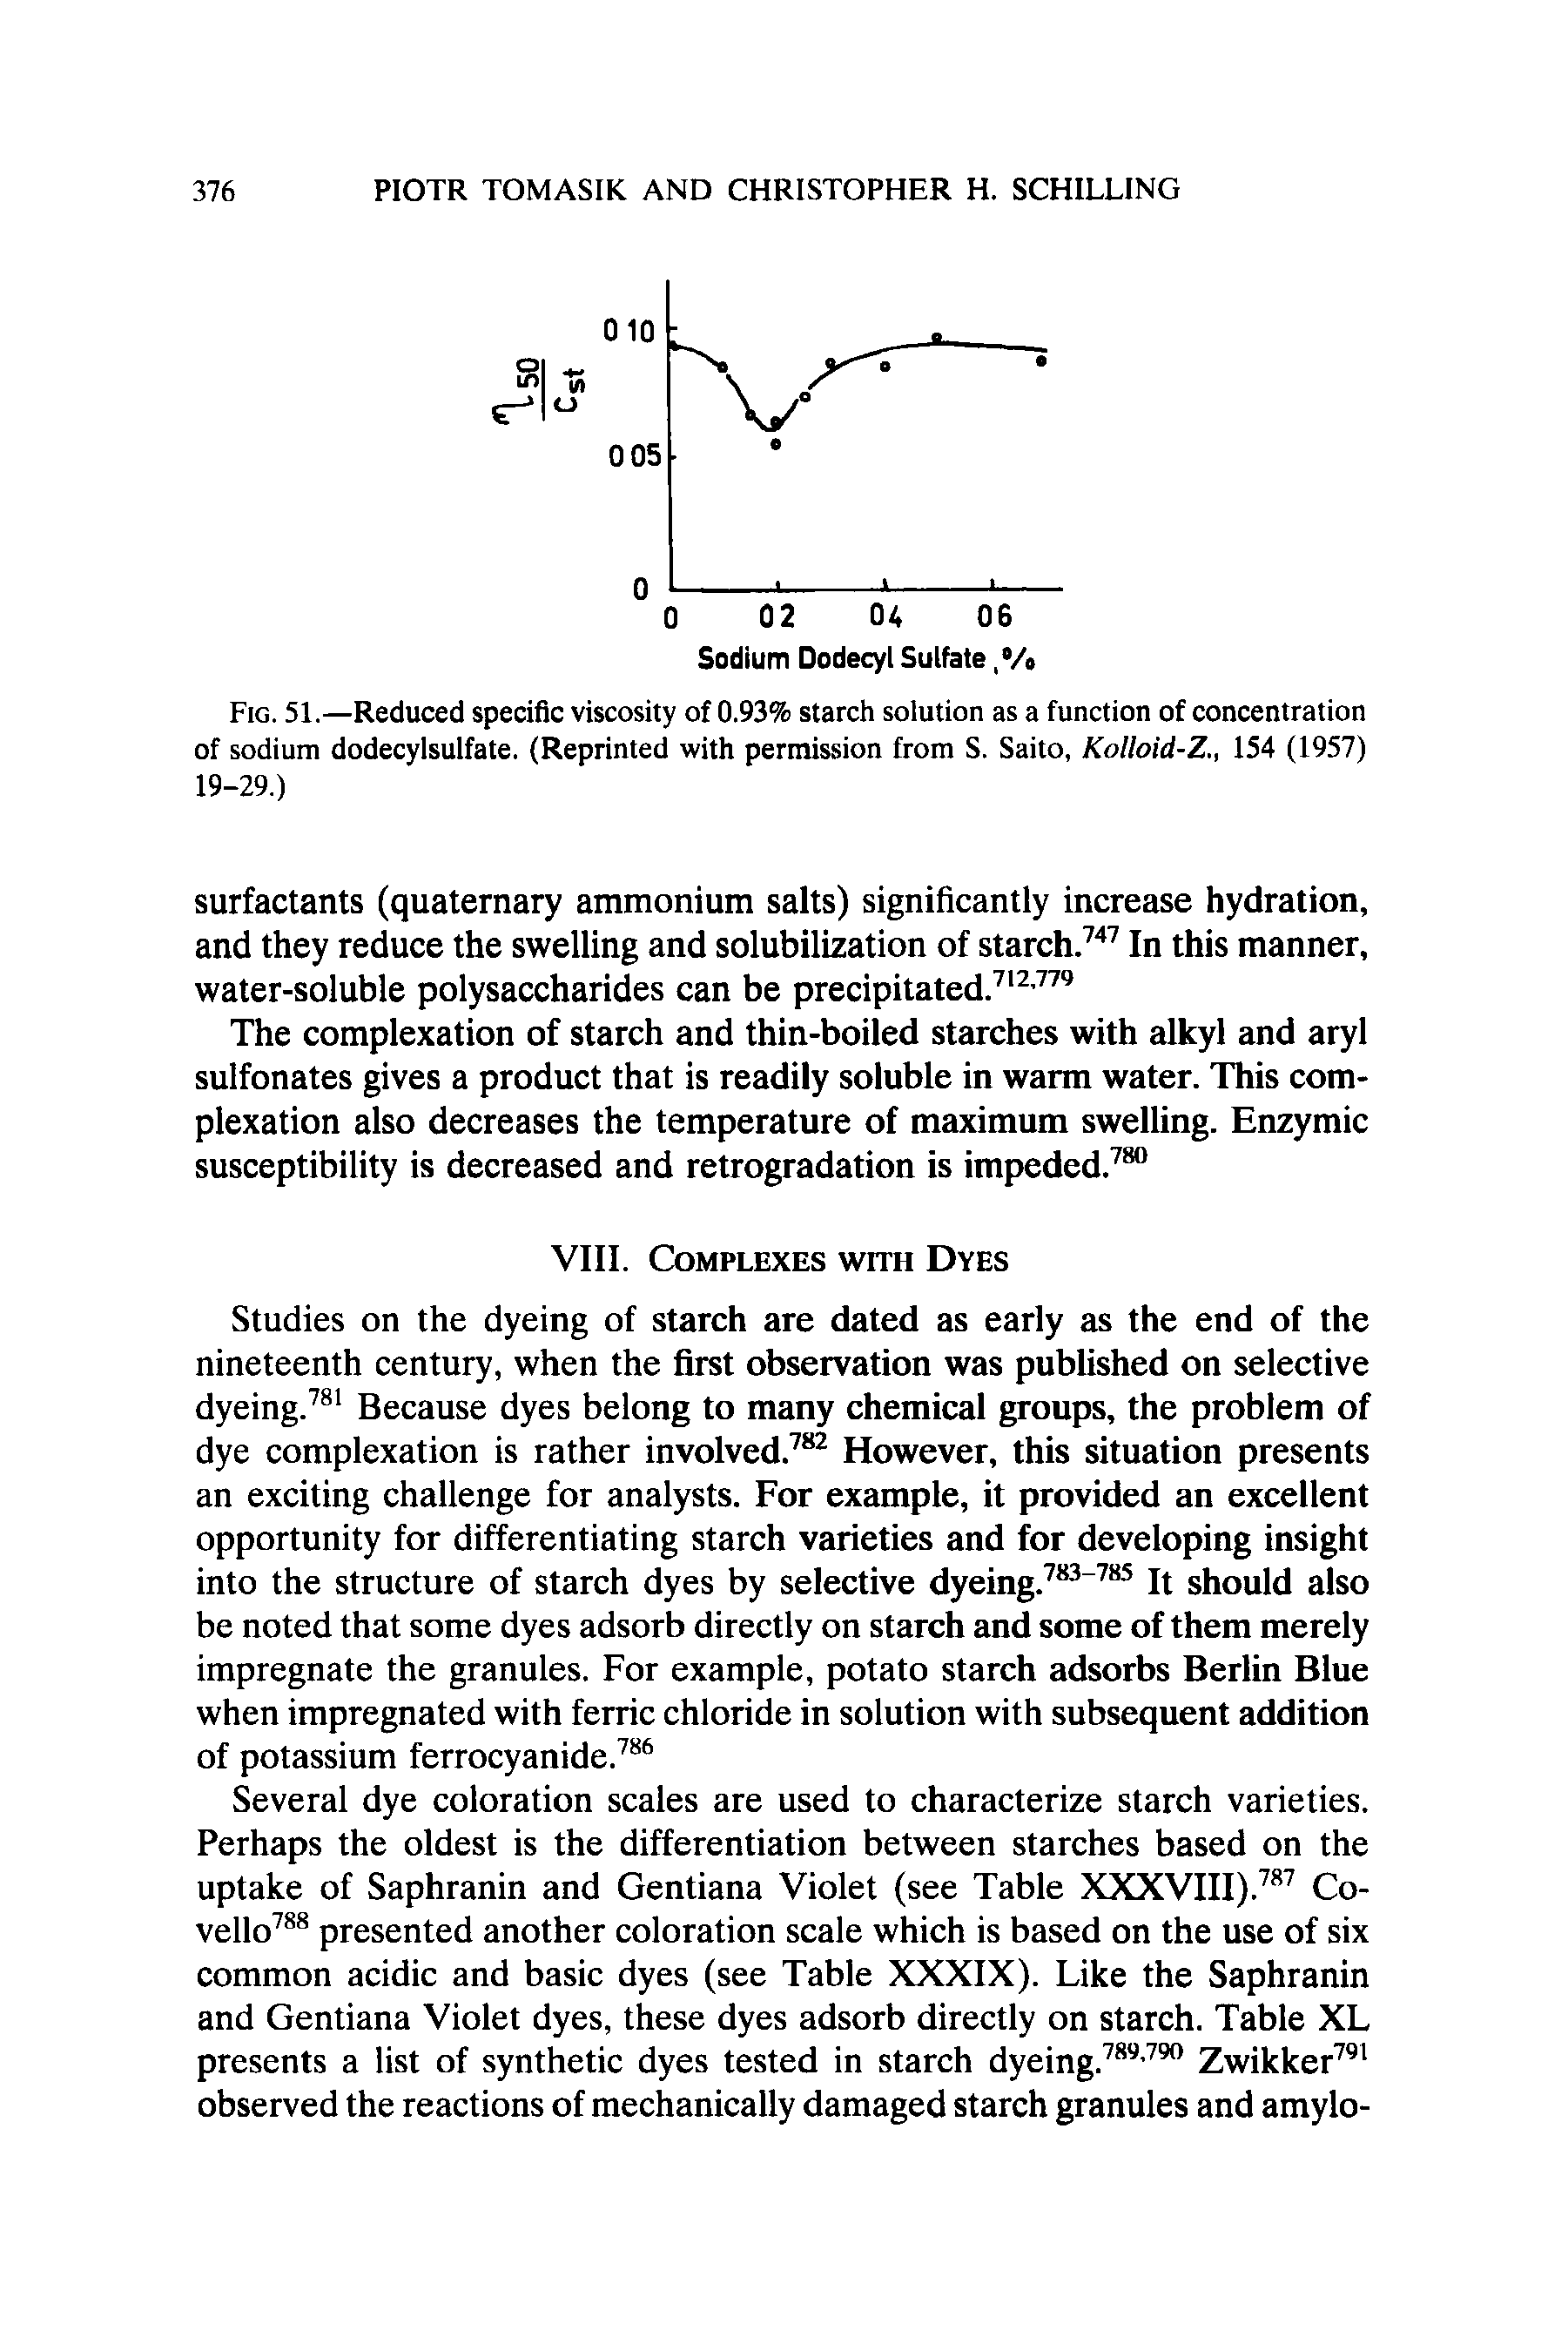 Fig. 51.—Reduced specific viscosity of 0.93% starch solution as a function of concentration of sodium dodecylsulfate. (Reprinted with permission from S. Saito, Kolloid-Z., 154 (1957) 19-29.)...